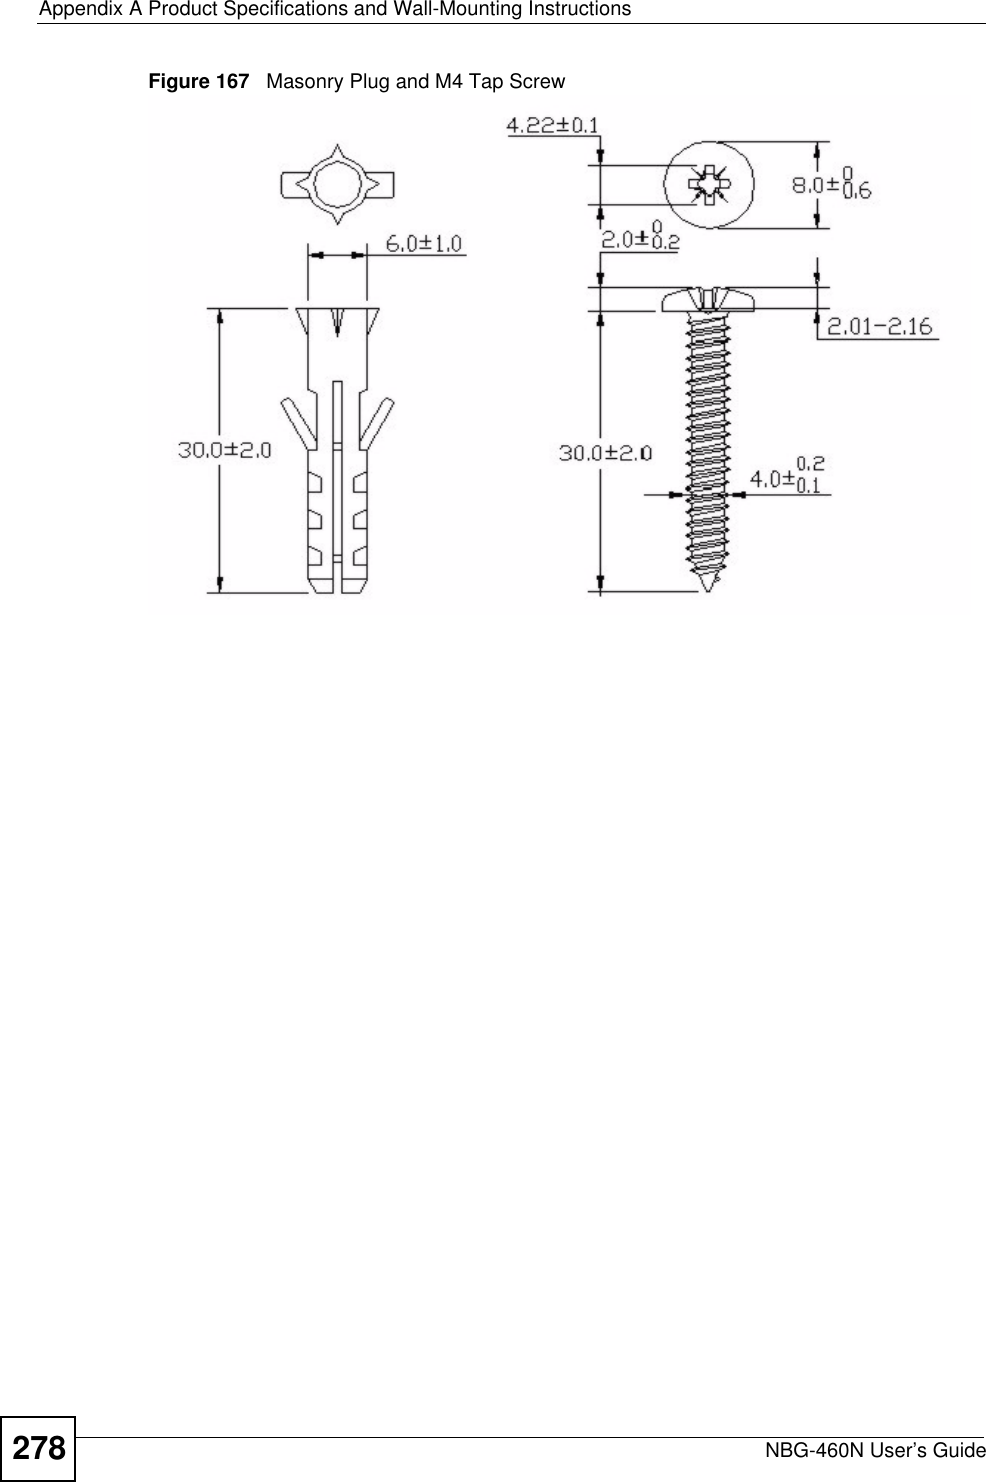 Appendix A Product Specifications and Wall-Mounting InstructionsNBG-460N User’s Guide278Figure 167   Masonry Plug and M4 Tap Screw